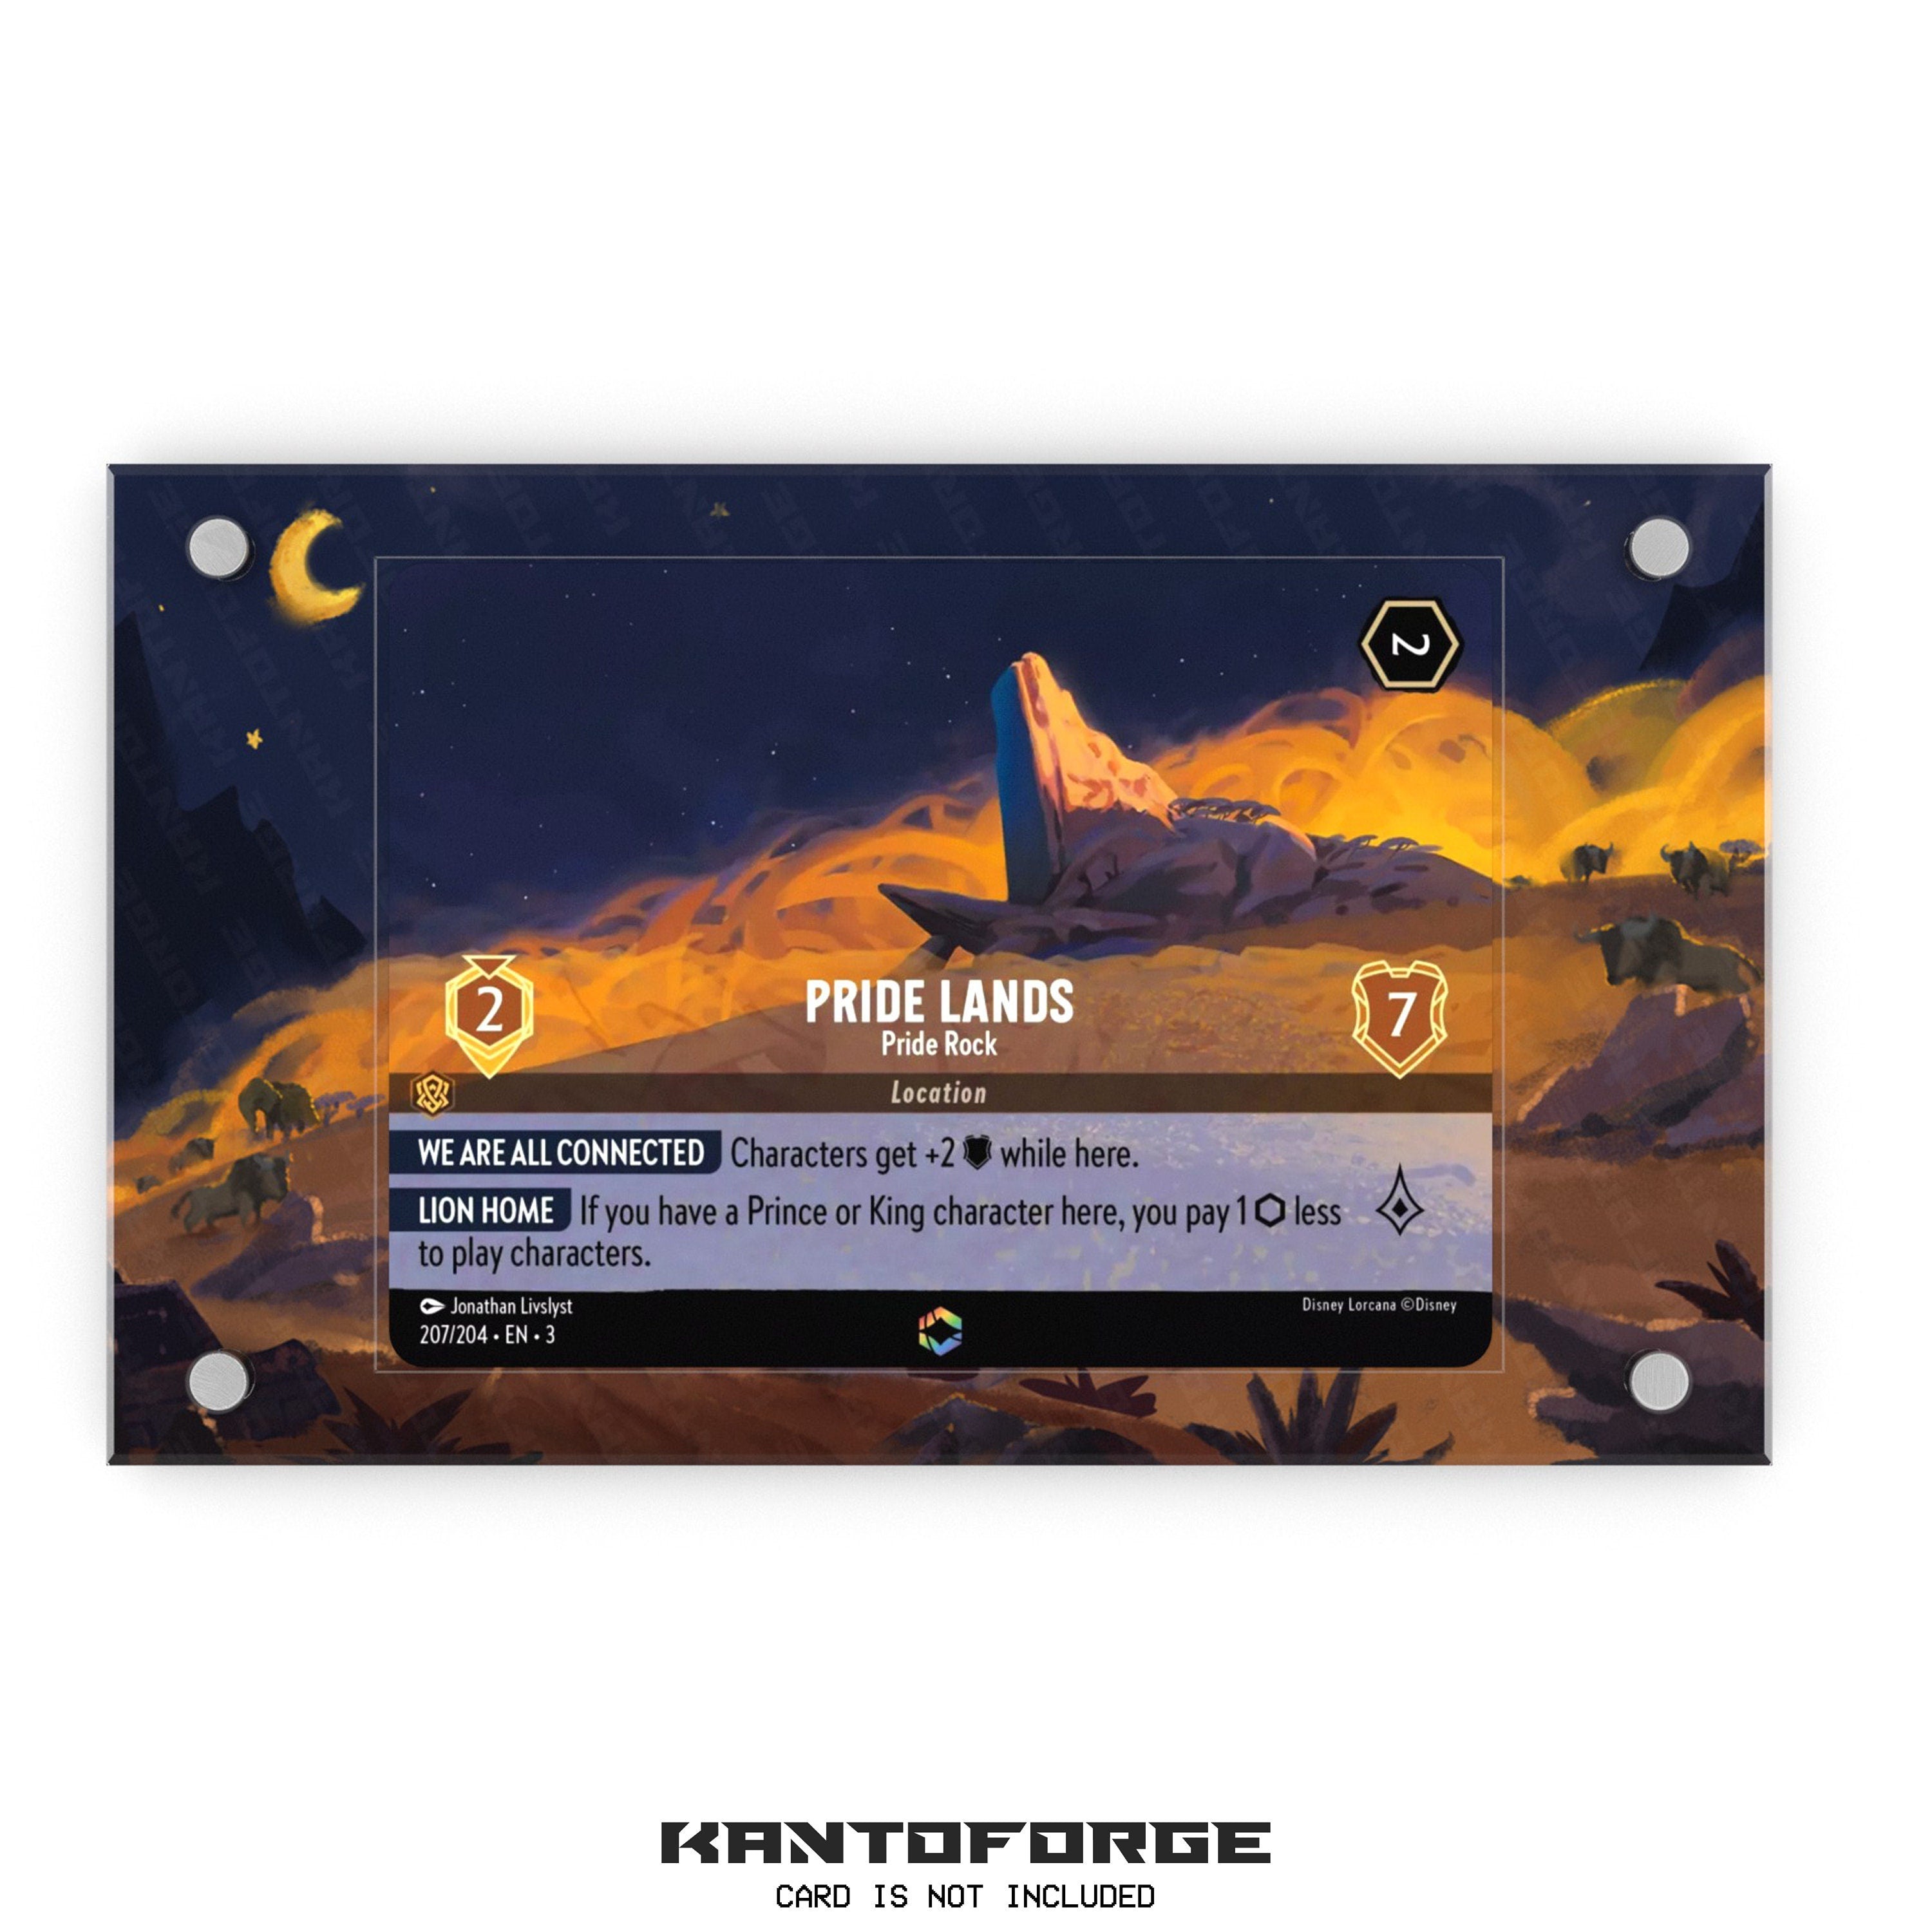 a screen shot of a video game called pride lands